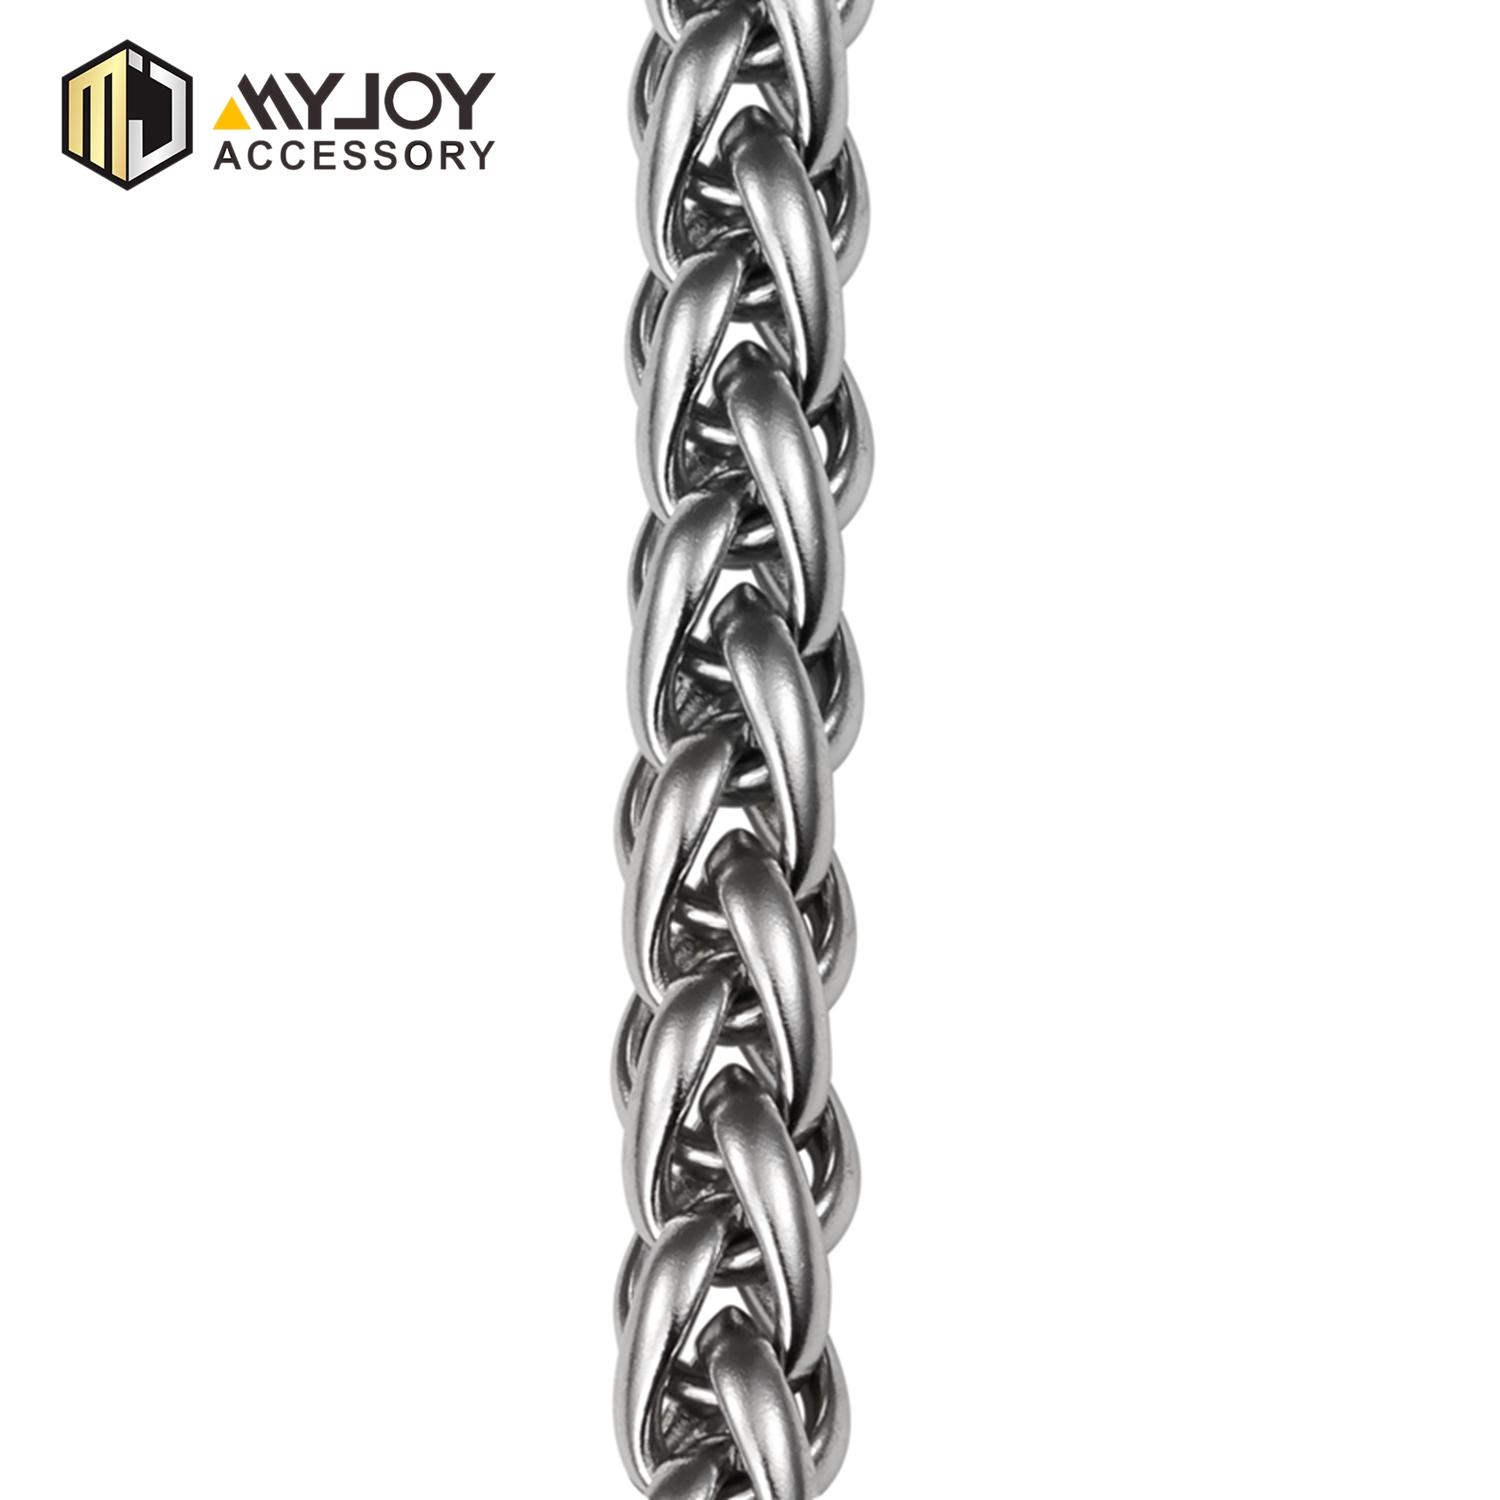 MYJOY new handbag chain strap manufacturers for bags